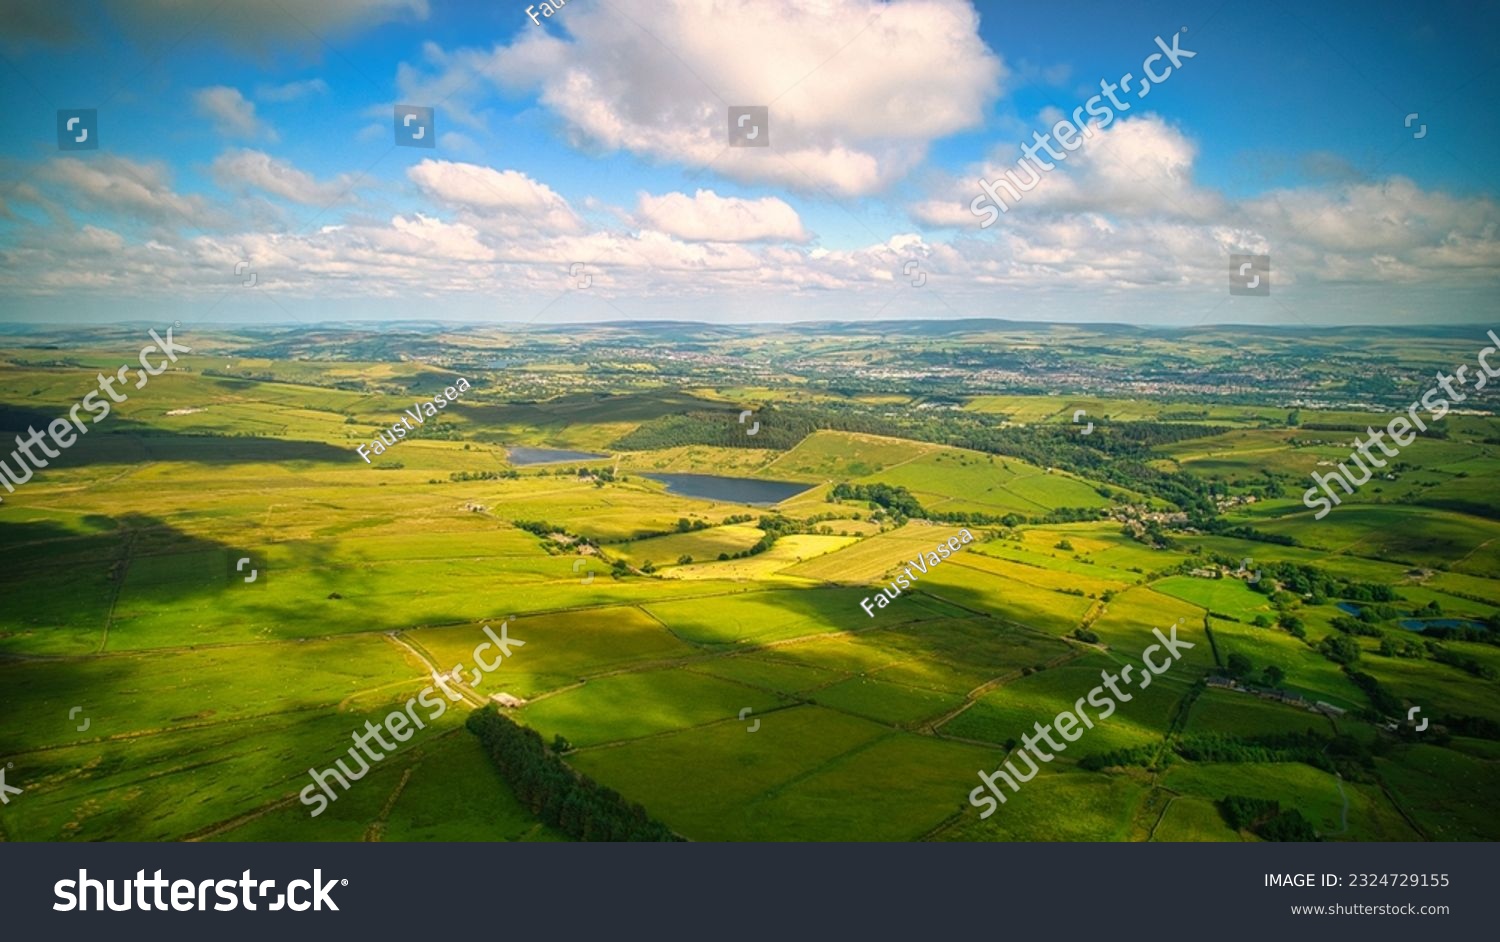 Stunning aerial landscape photo in Yorkshire  #2324729155